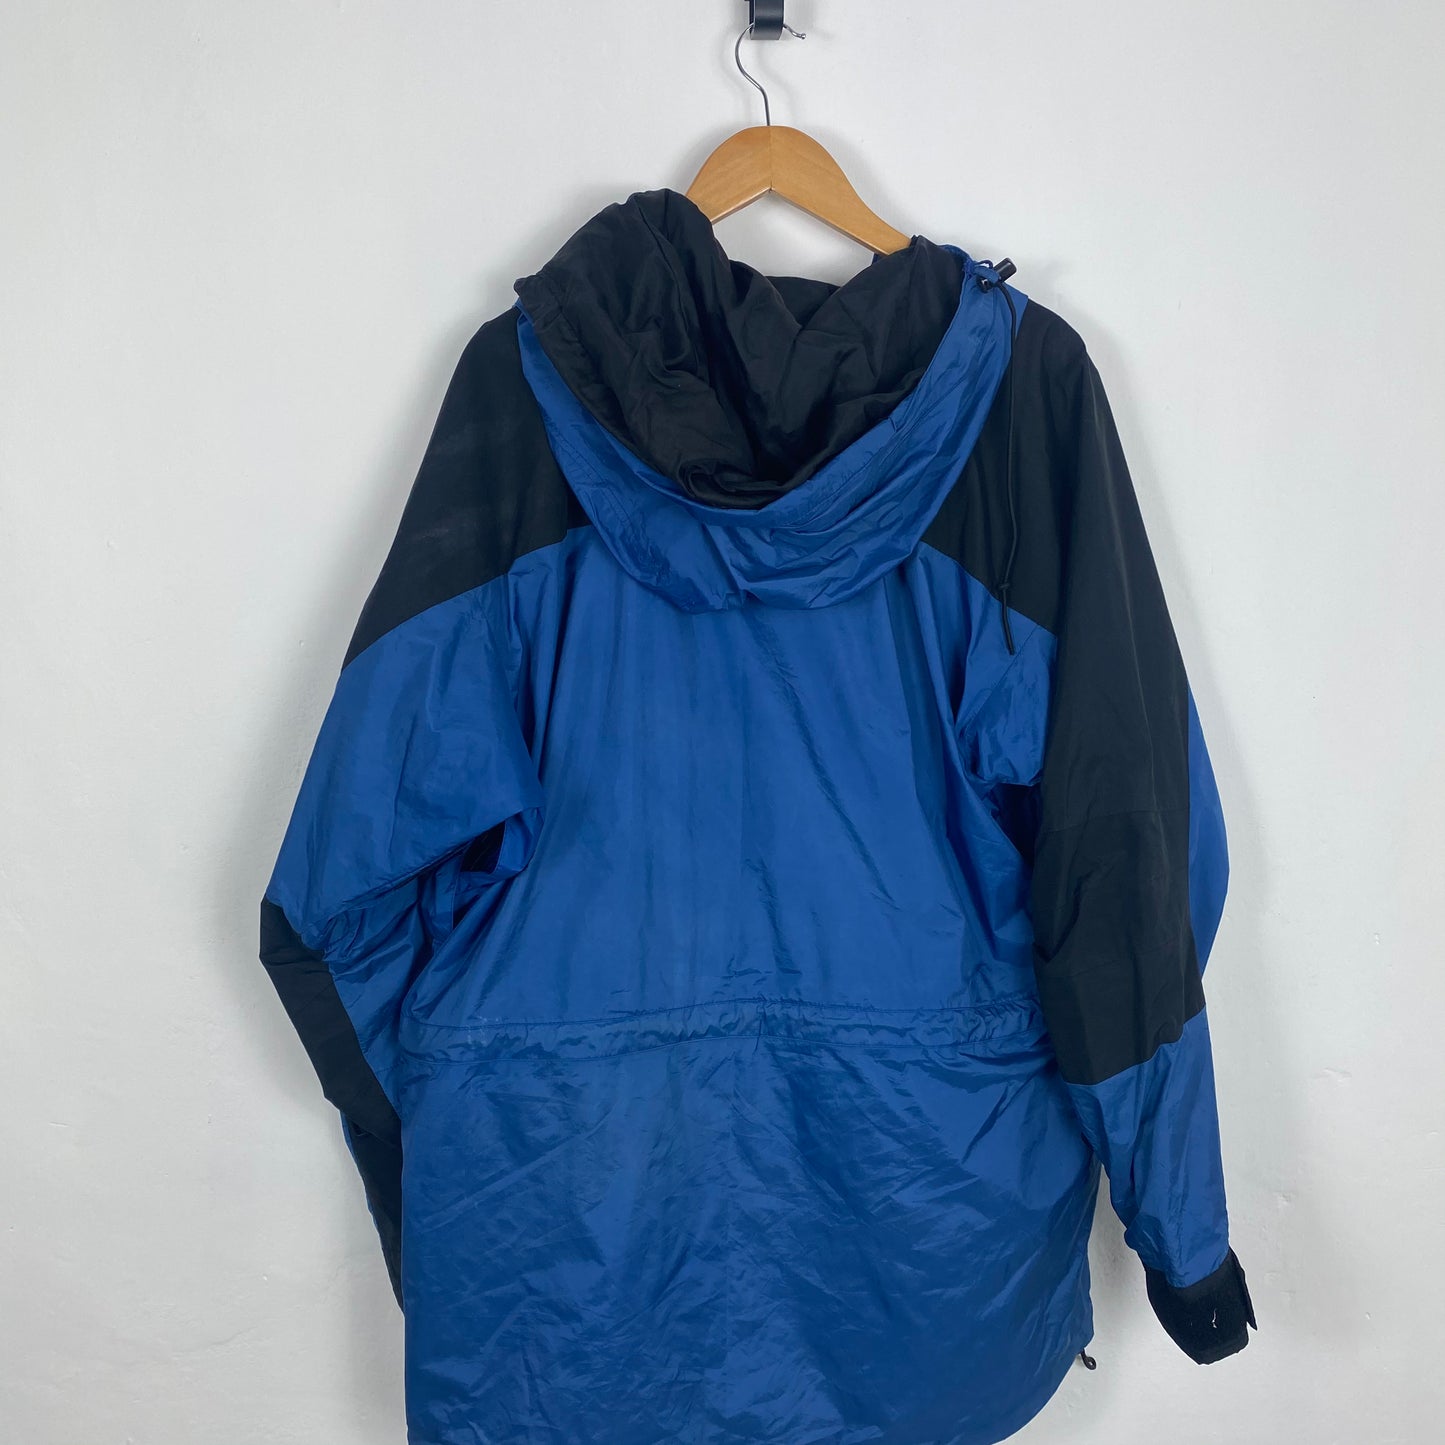 North face 90s jacket large